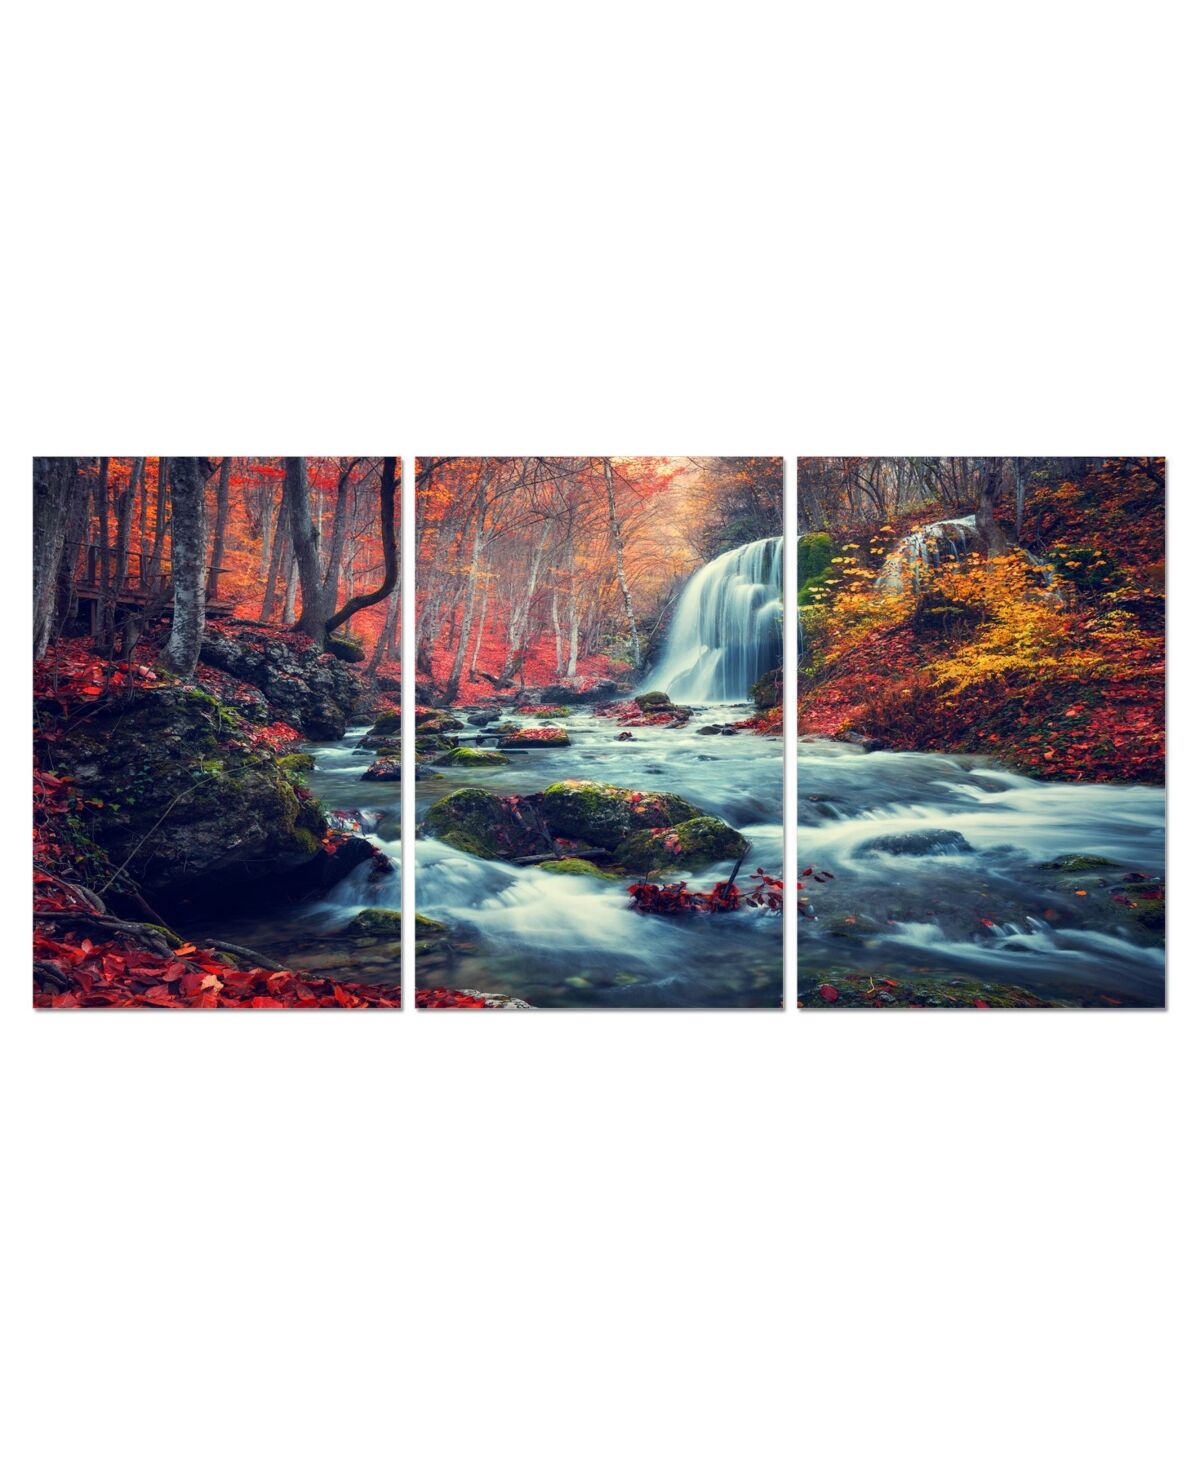 Chic Home Decor Autumn Forest 3 Piece Wrapped Canvas Wall Art -27